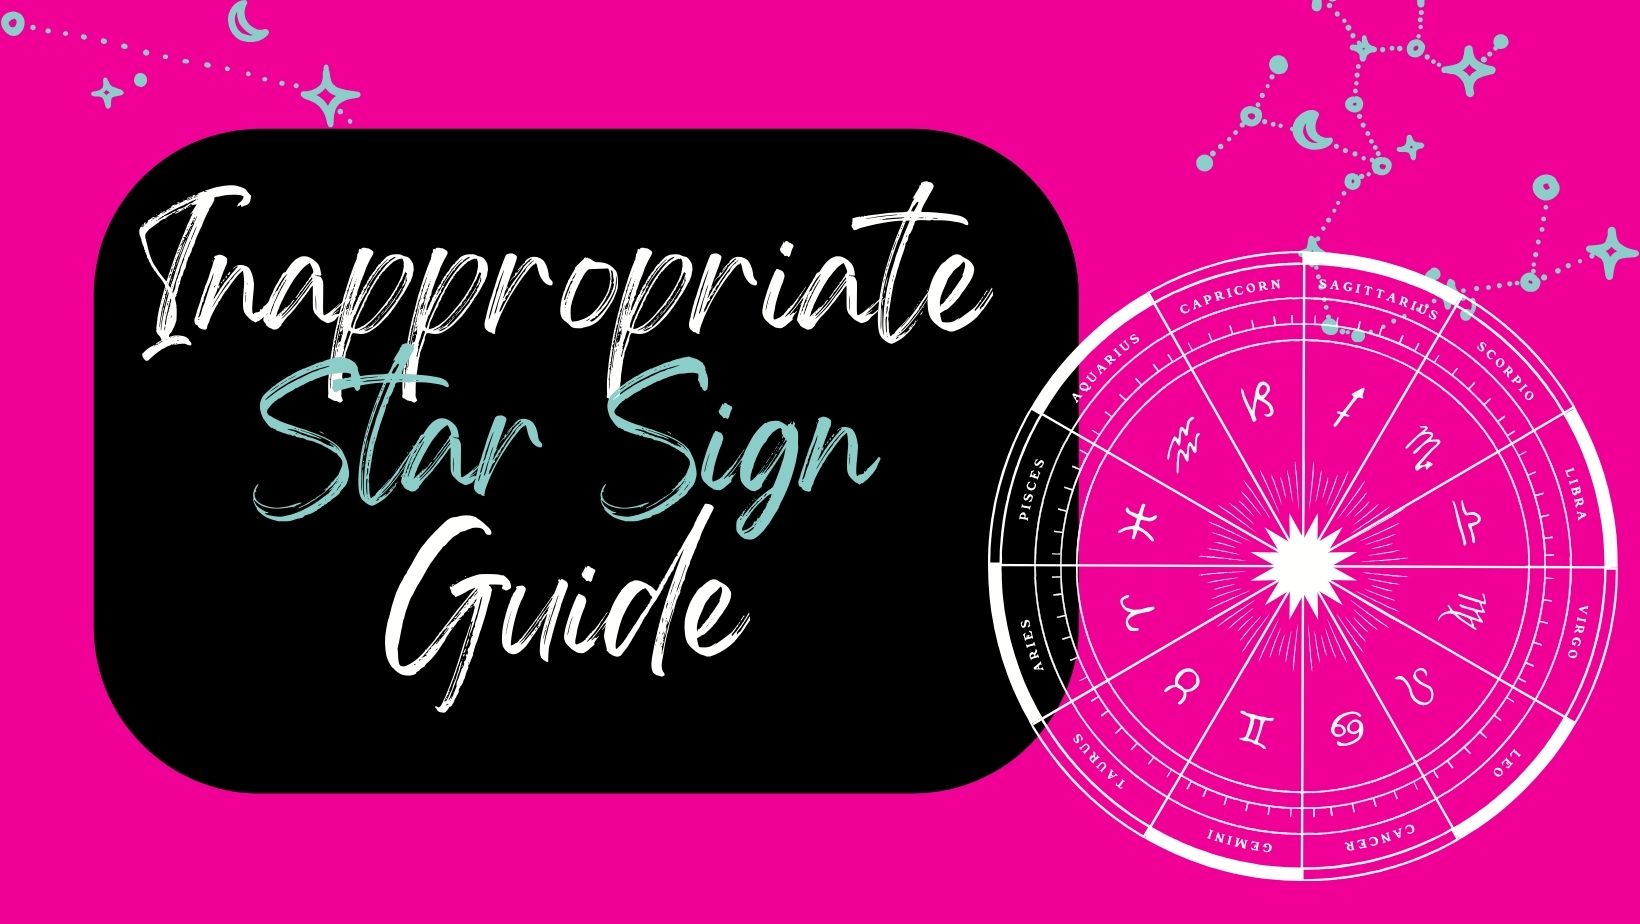 Sarcastic Star Signs. Gift ideas for the Signs of the Zodiac